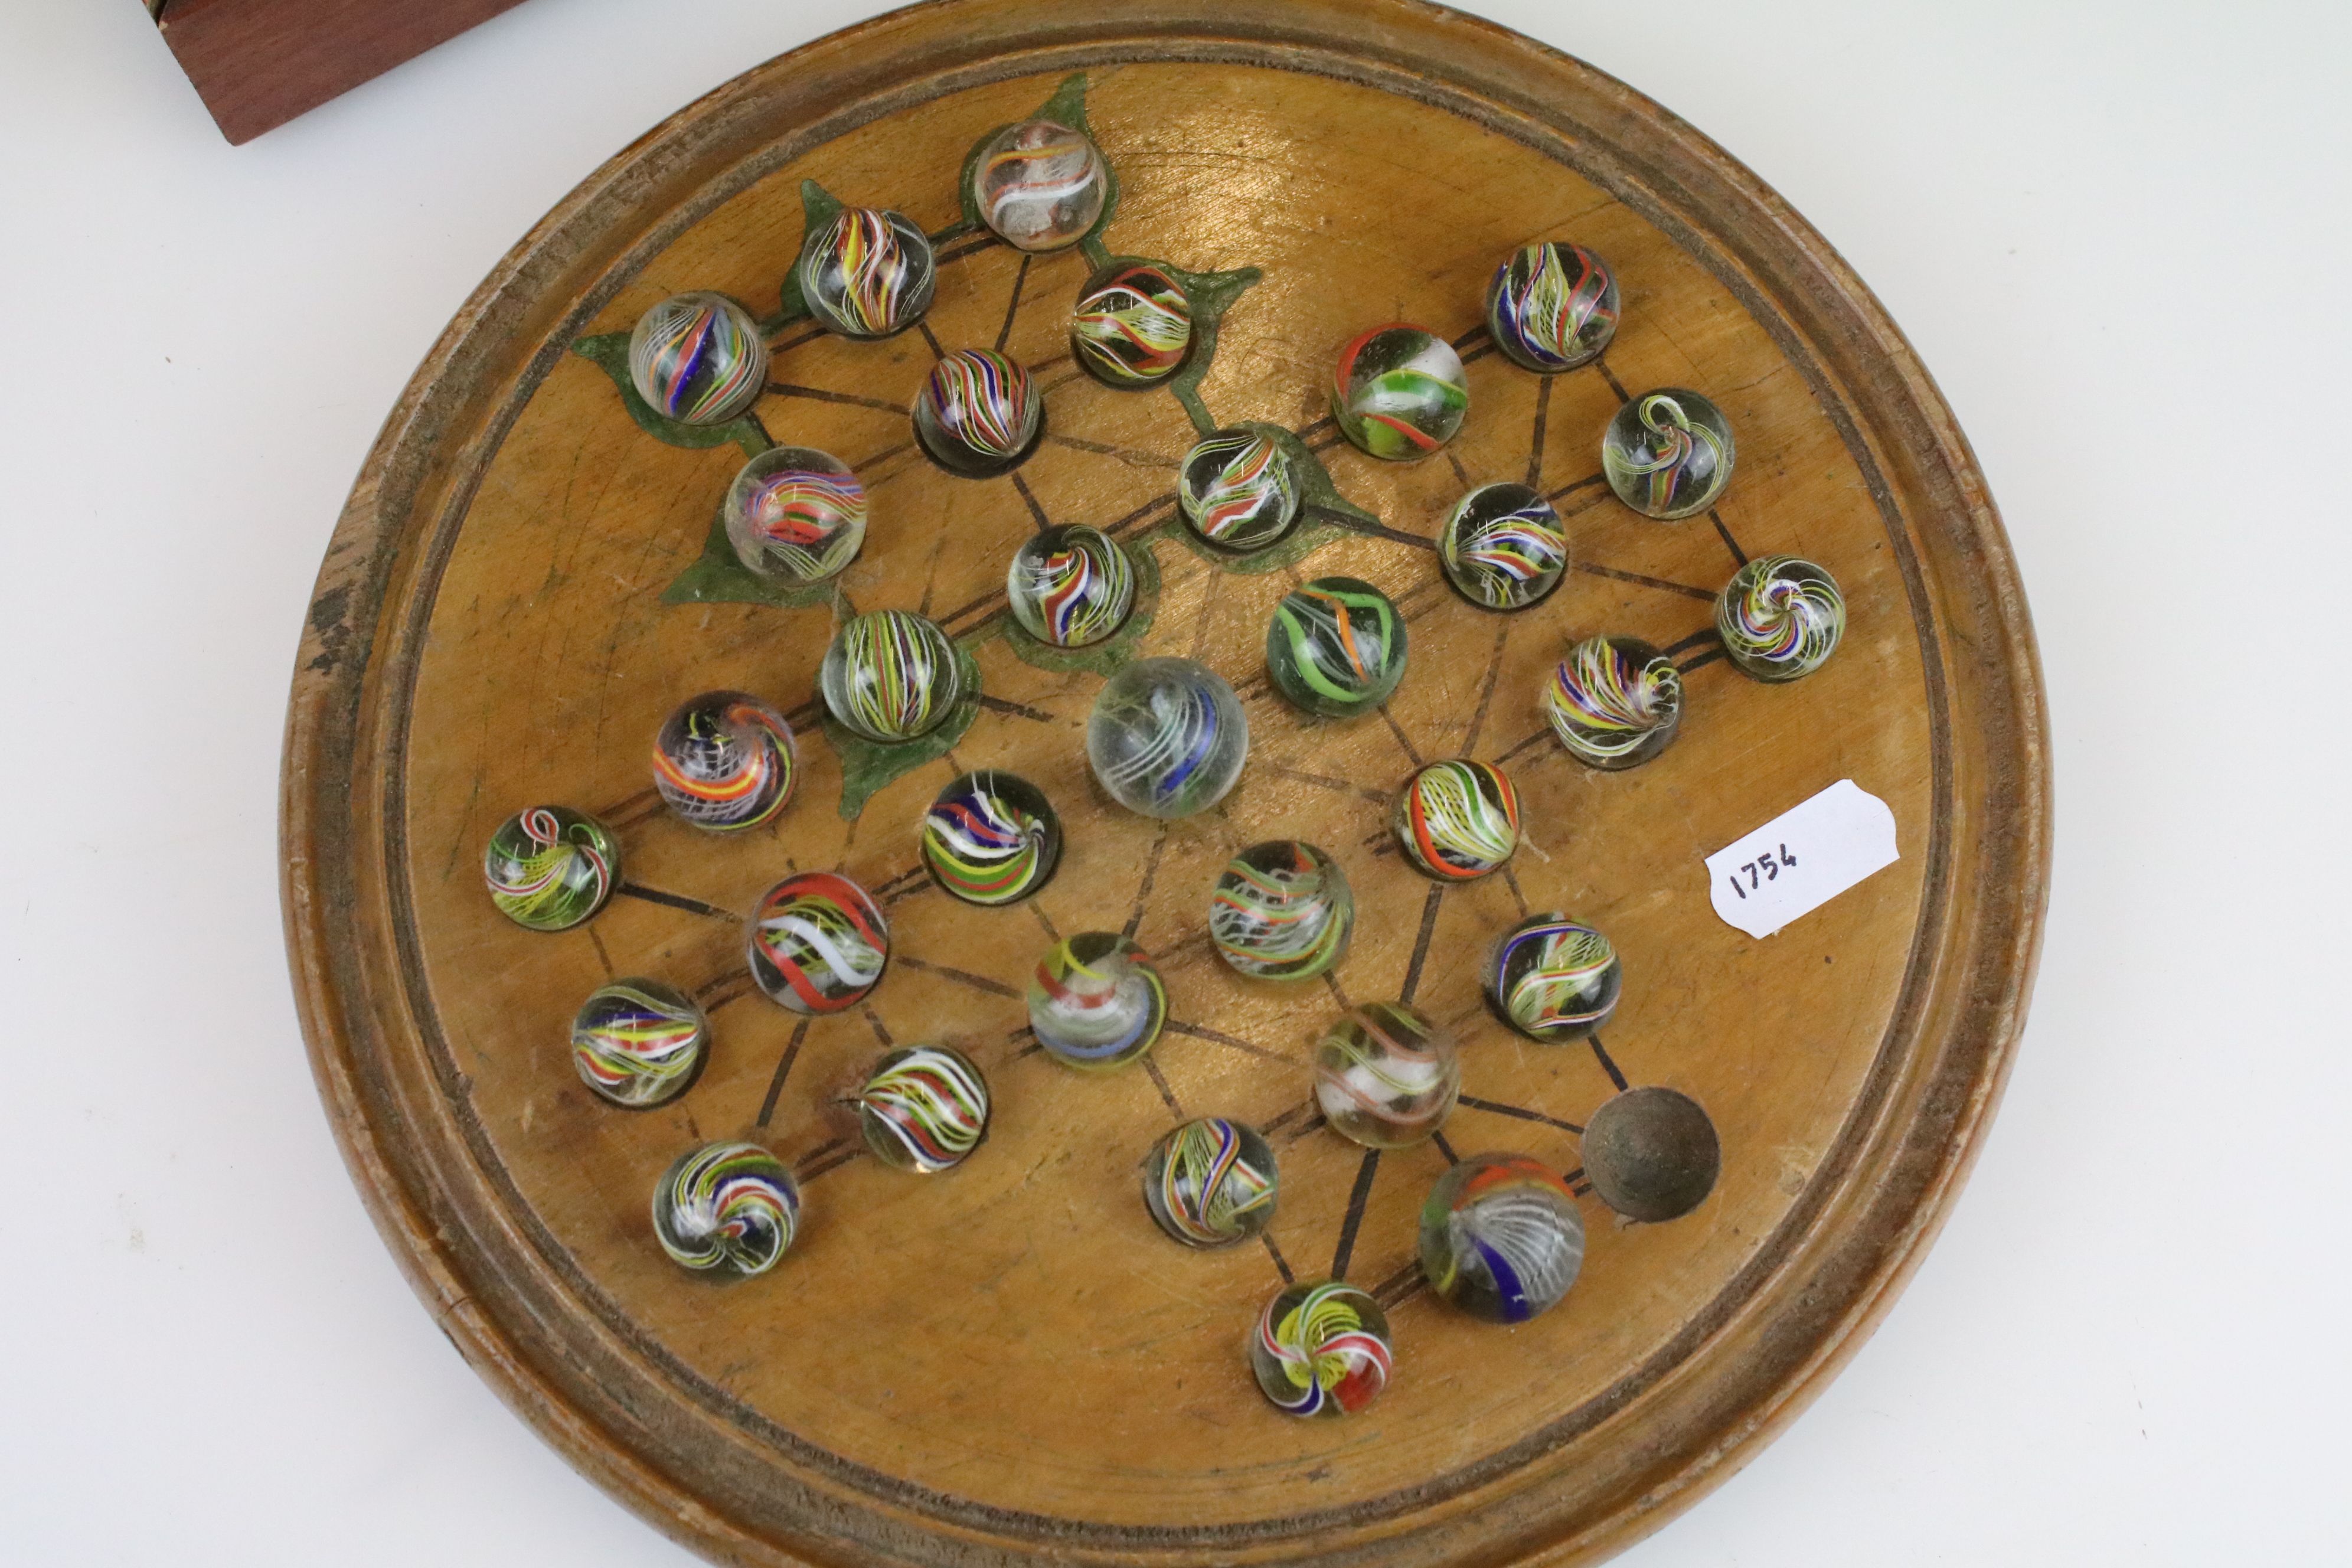 An antique carved wooden solitaire board complete with antique marbles. - Image 2 of 4